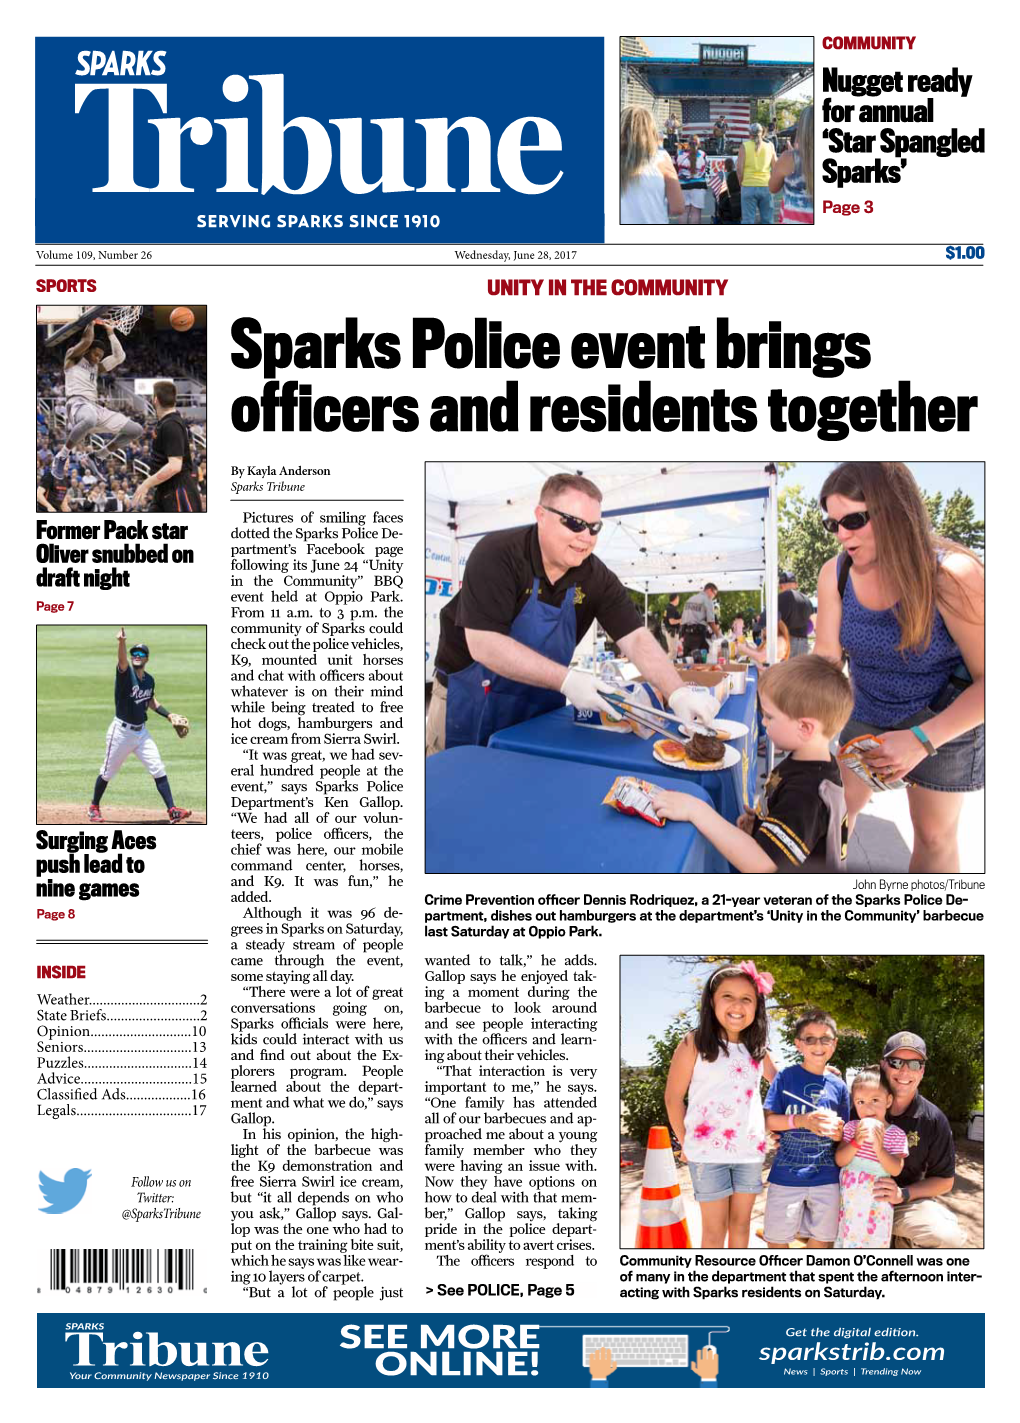 Sparks Police Event Brings Officers and Residents Together